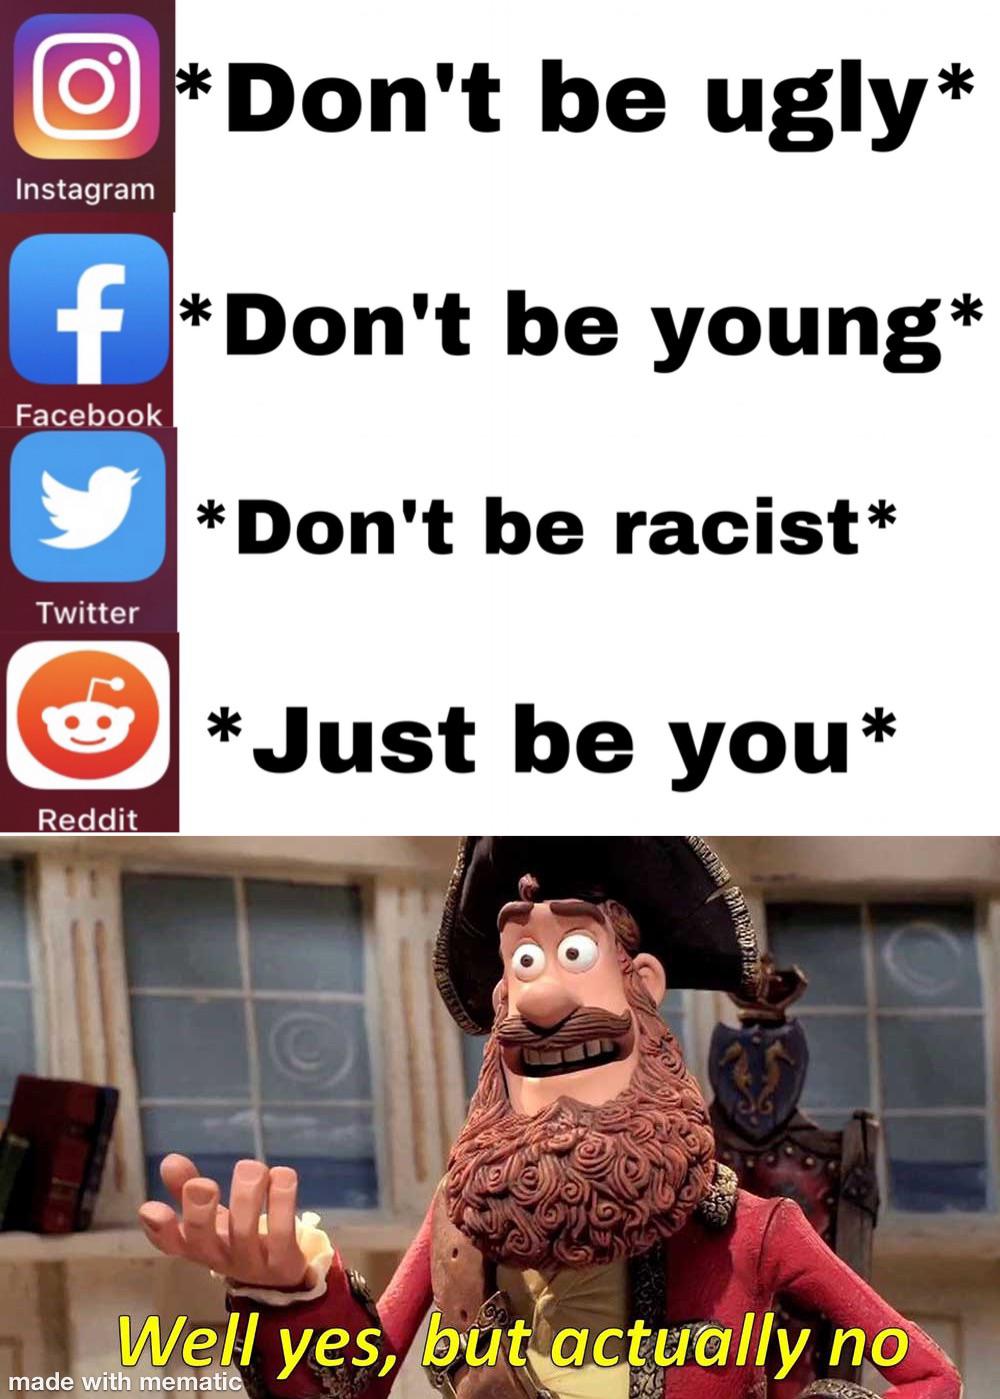 well yes but actually no - O Don't be ugly Instagram f Don't be young Facebook Don't be racist Twitter Just be you Reddit Well yes, but actually no made with mematic